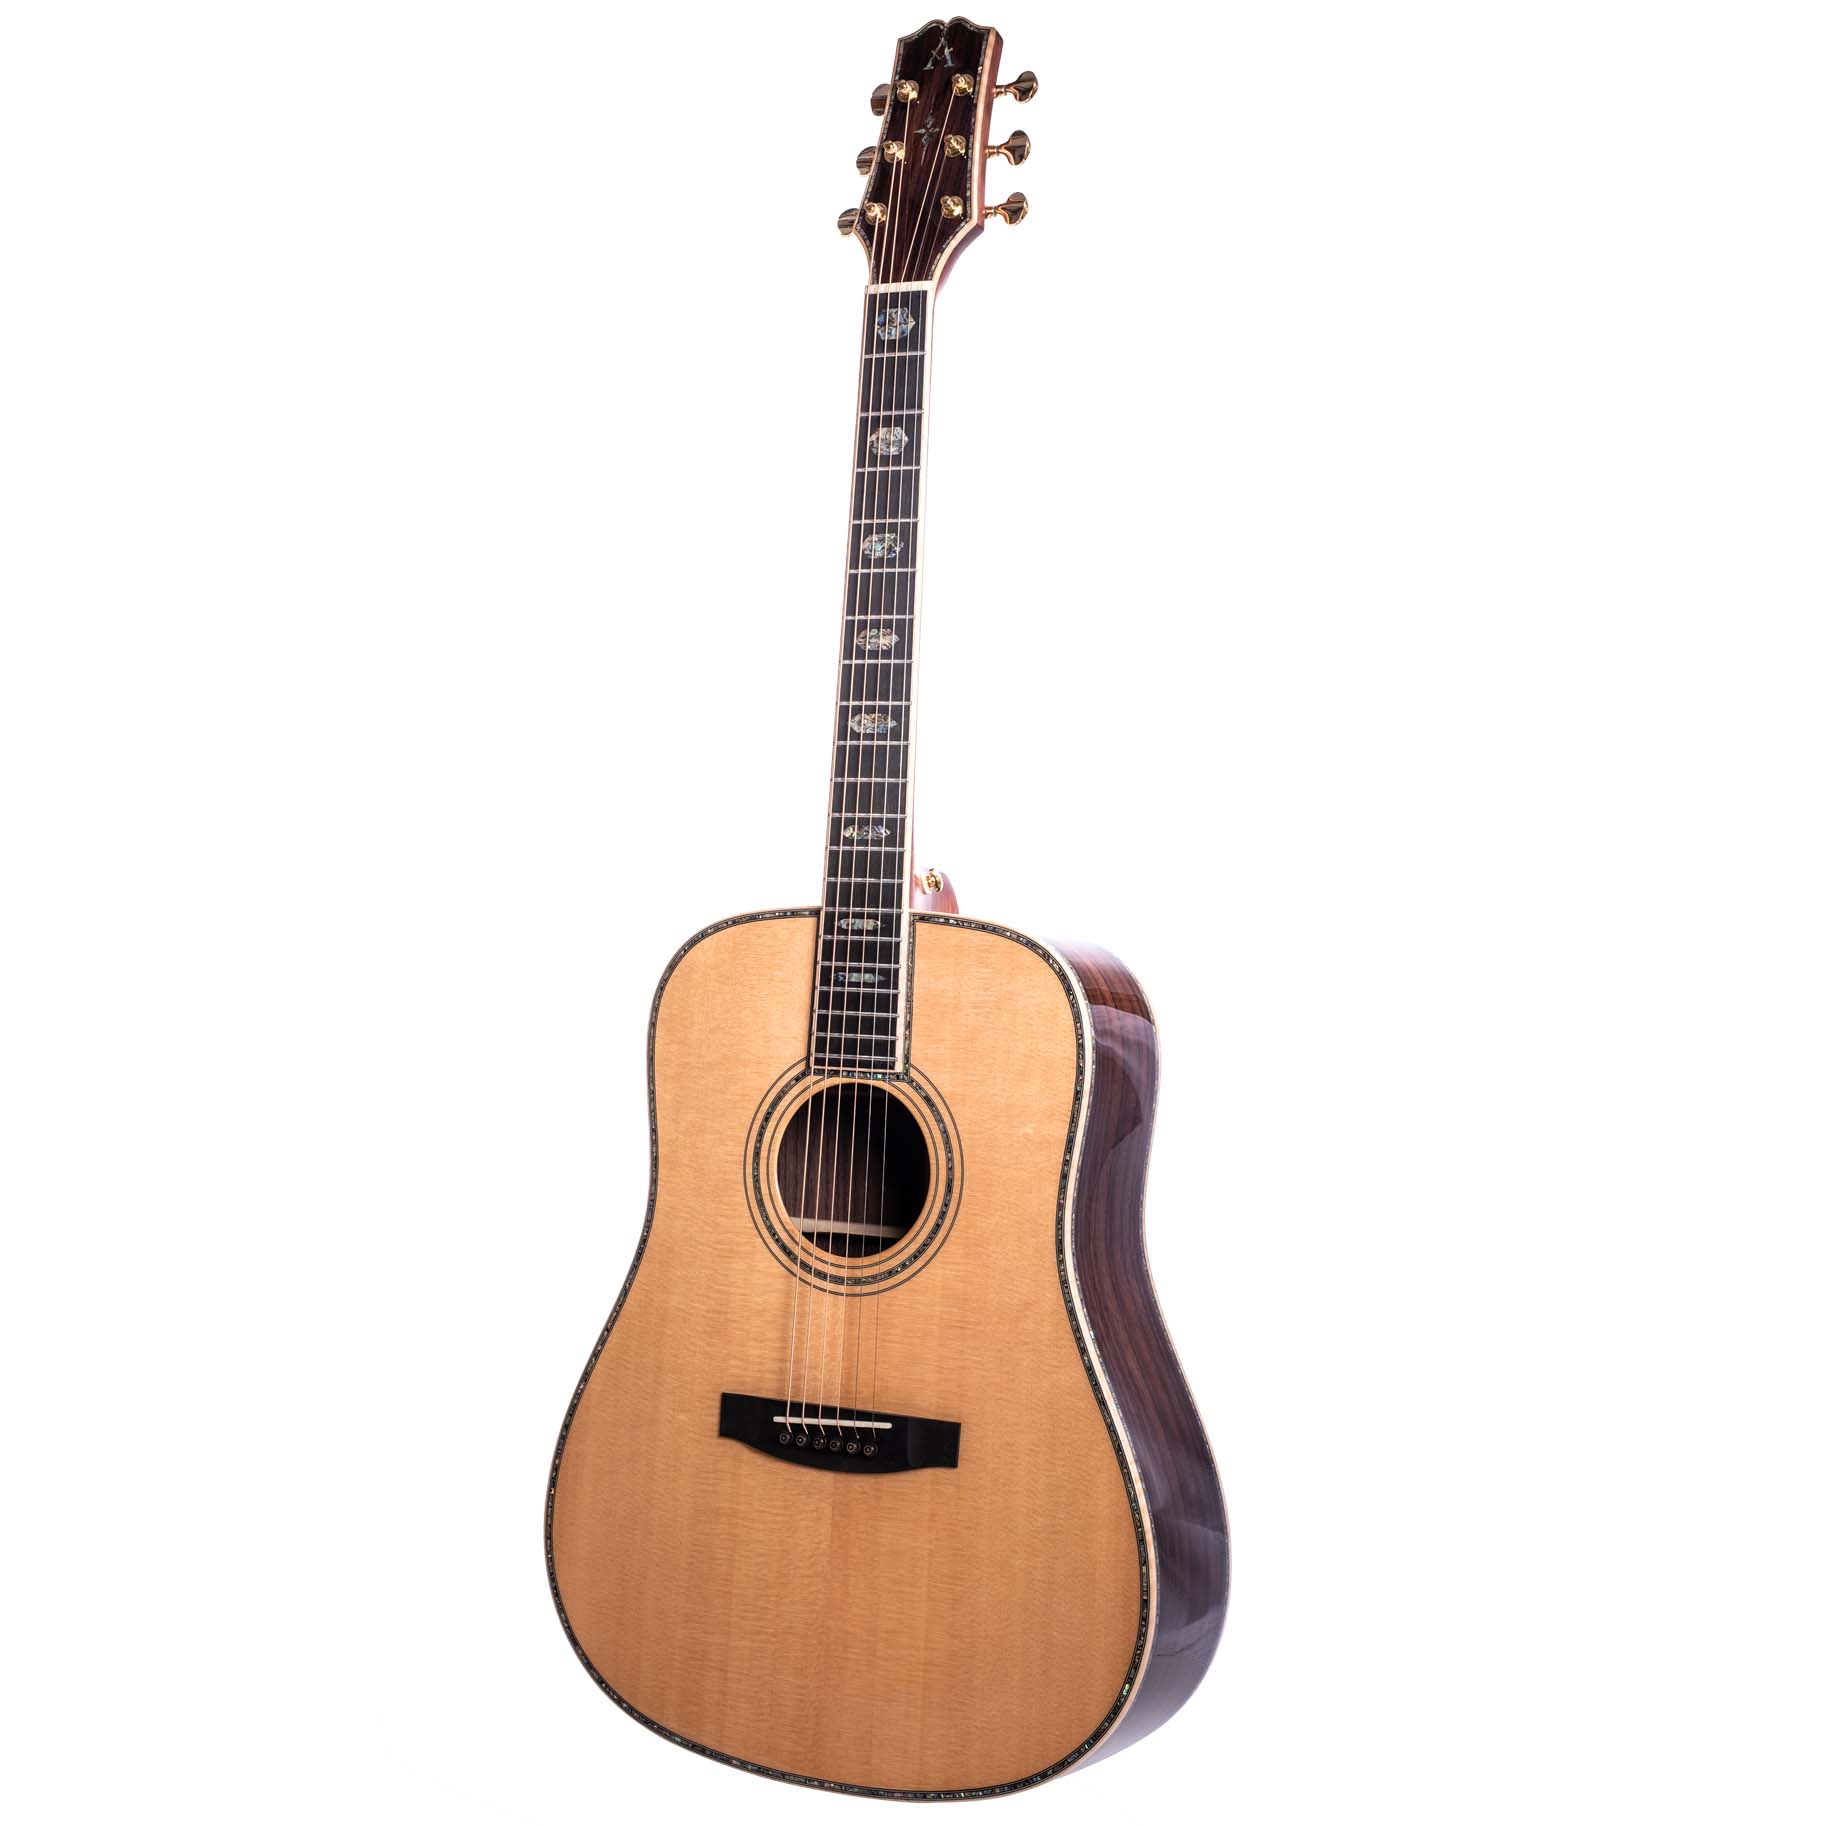 AOSEN D-930:Selected spruce all solid acoustic guitar, mellow and full sound, your first choice for your first guitar